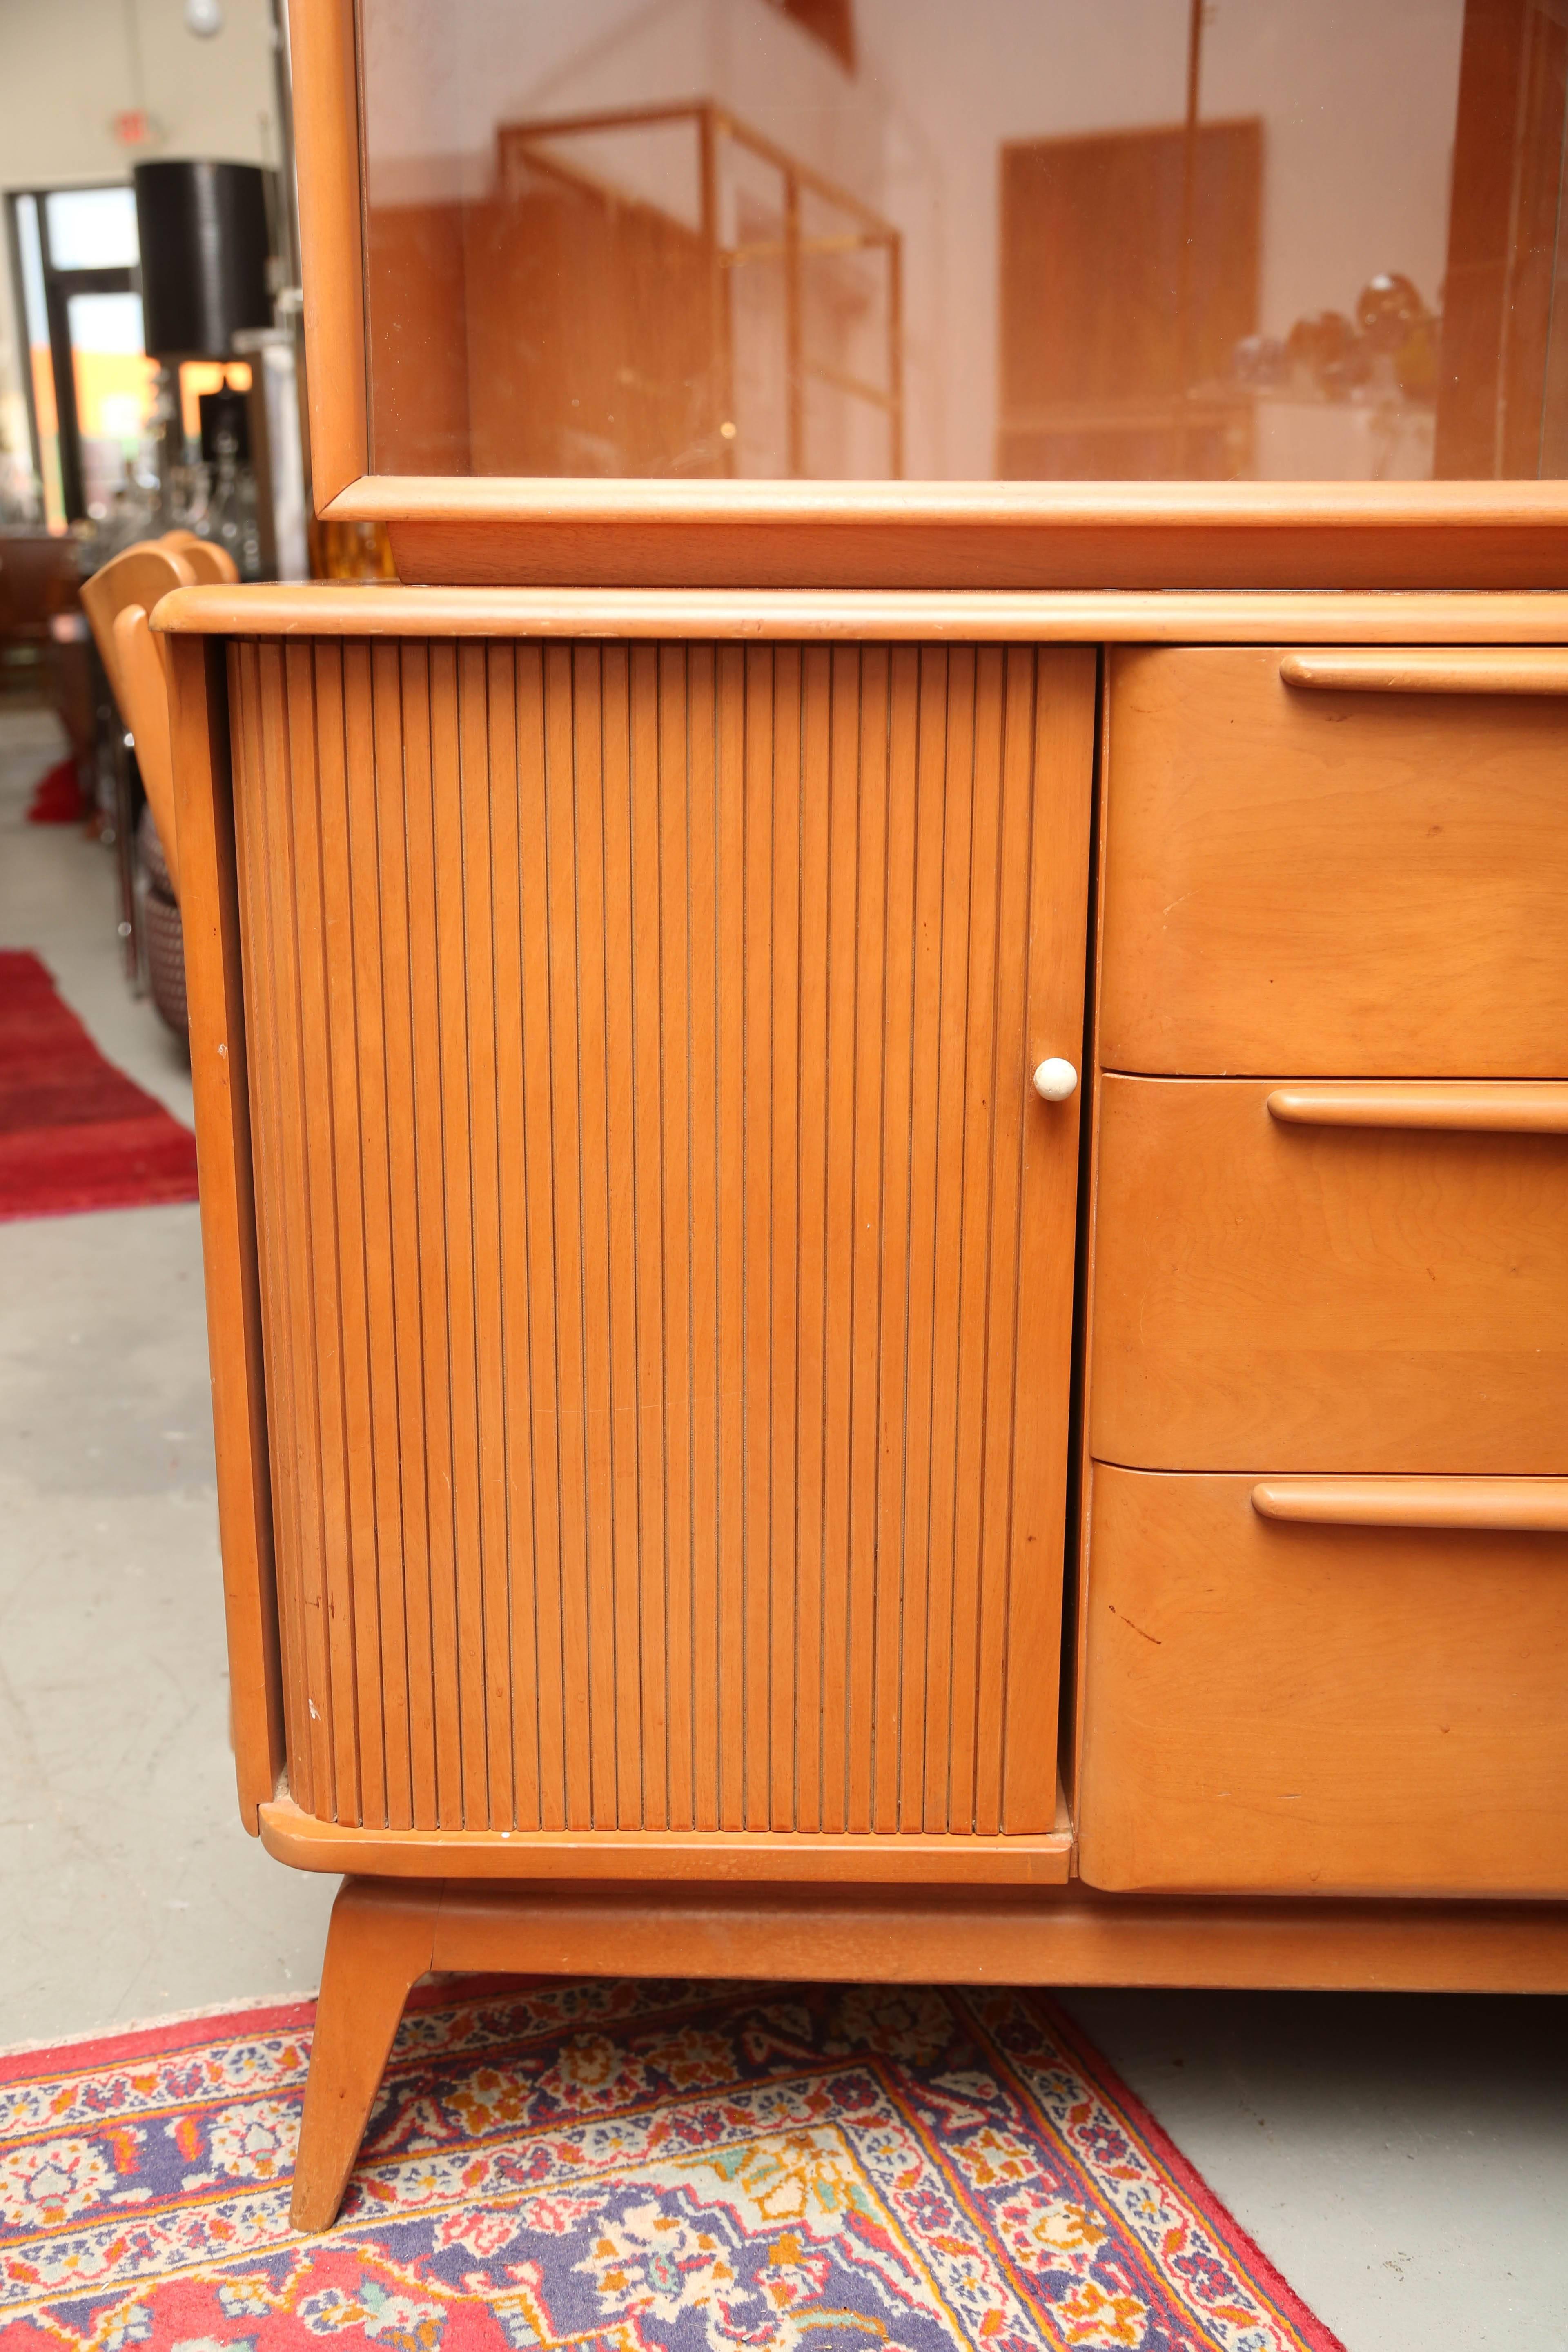 Two-piece Heywood-Wakefield cabinet that come a part and be used as a credenza or can be used together as a china hutch.